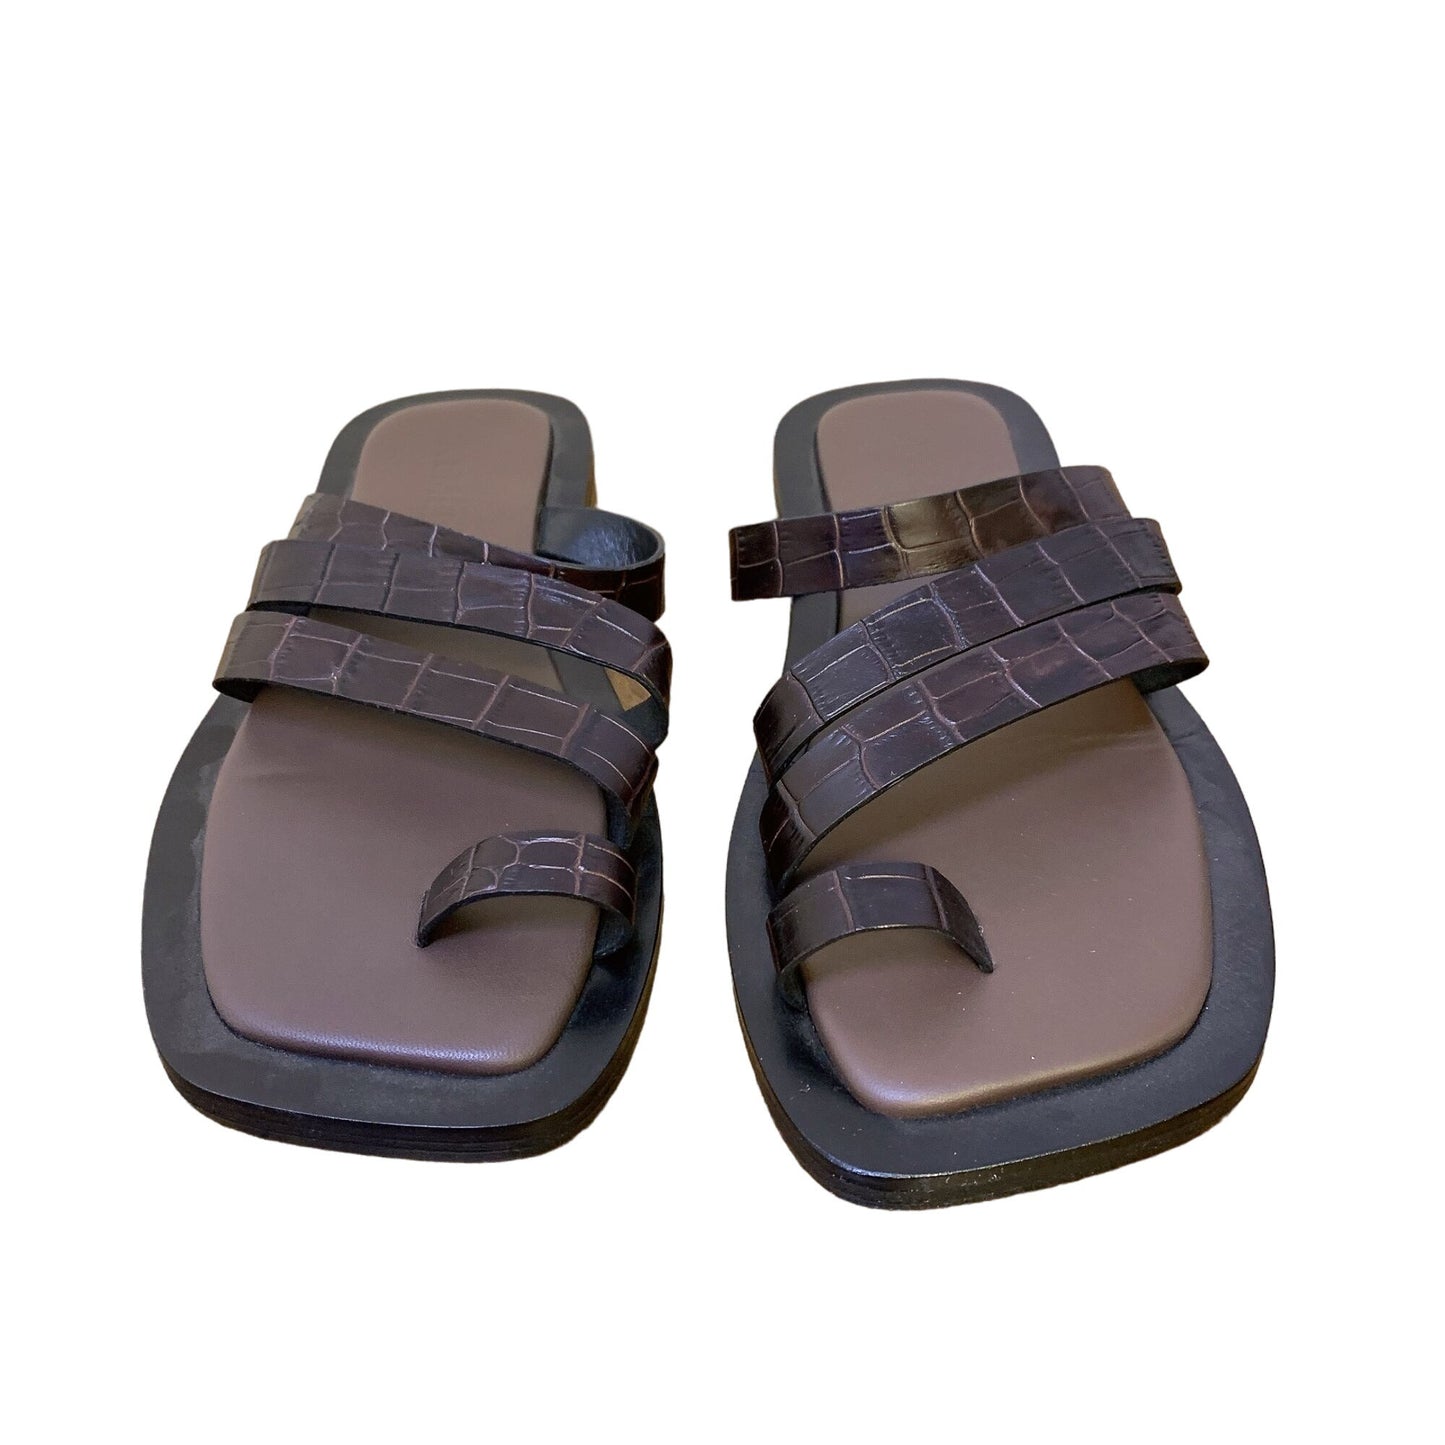 *A. Emery Brown Leather Sandals Size 7.5